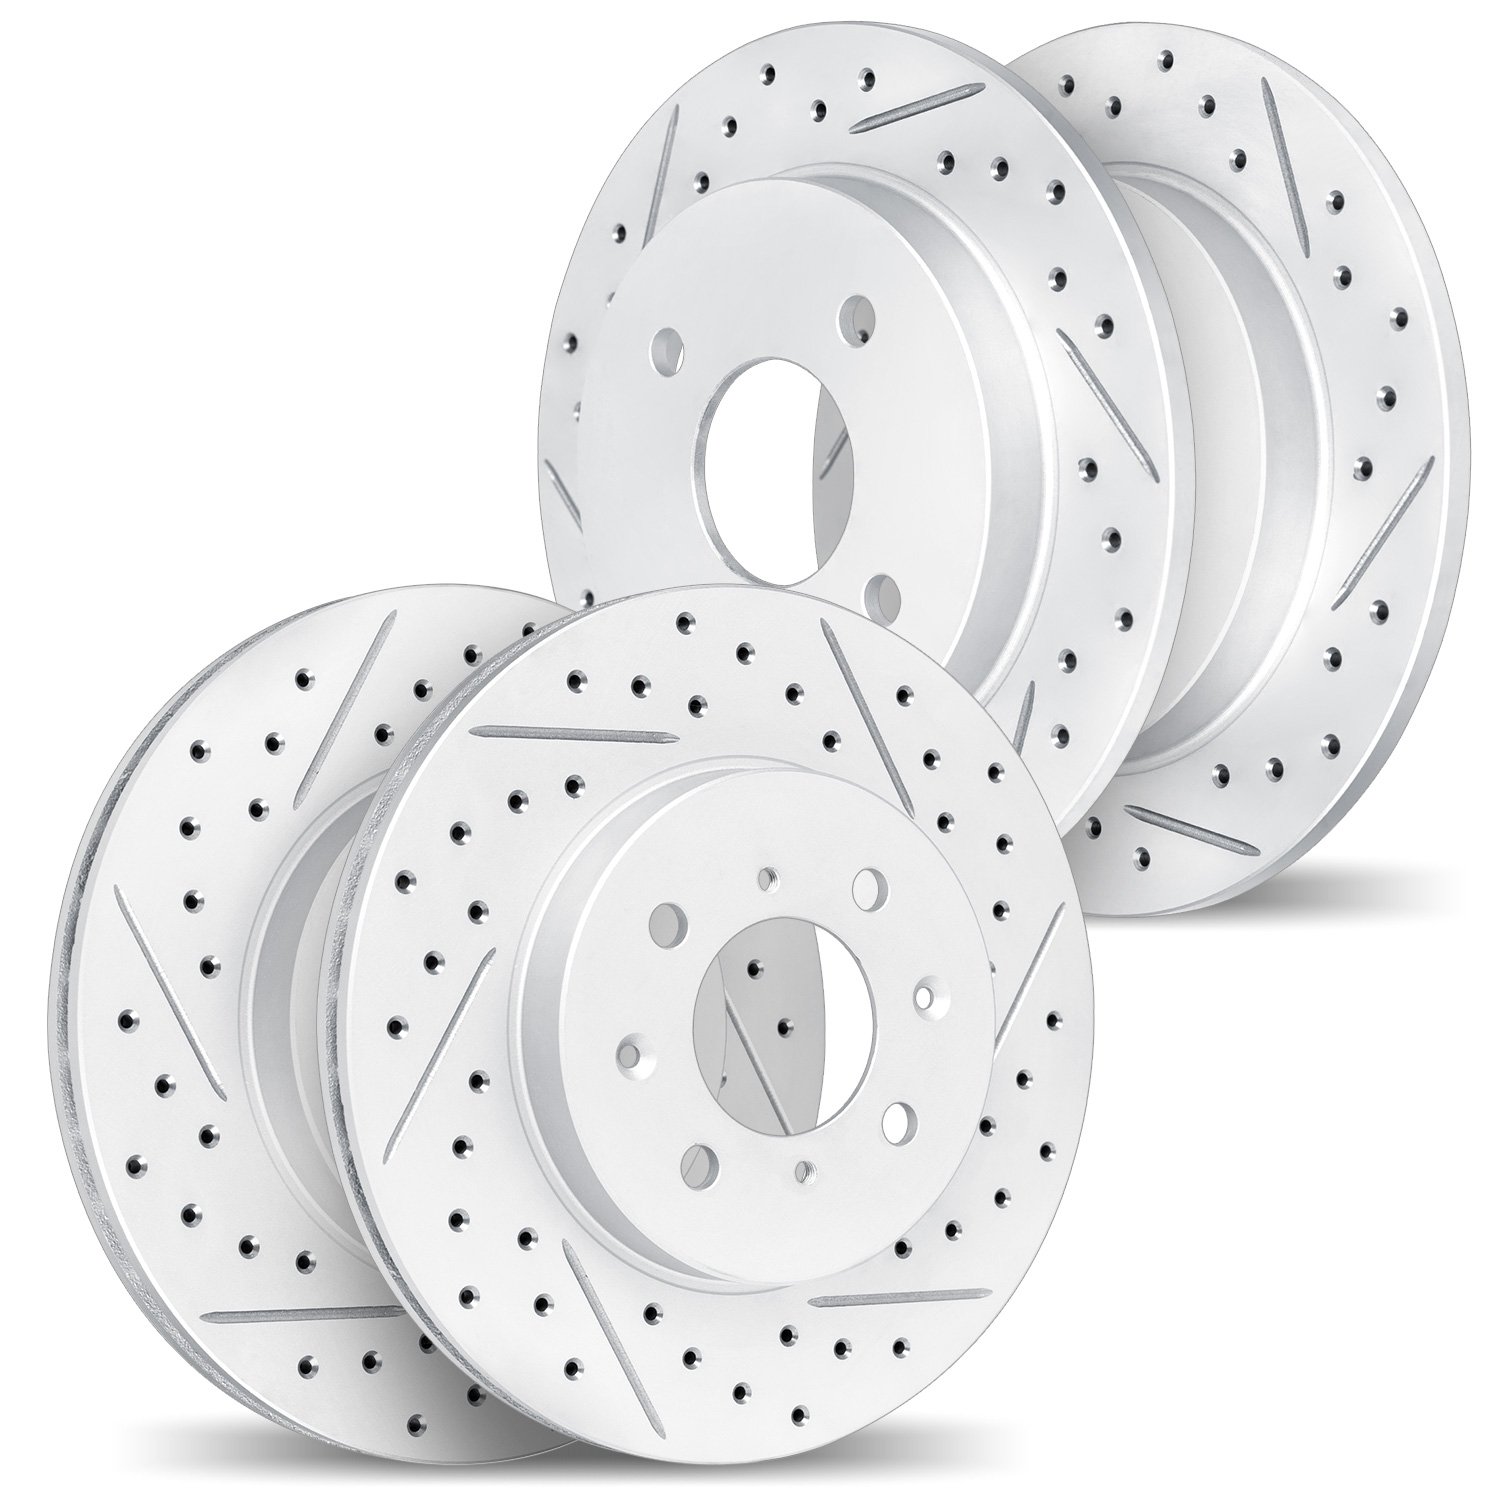 2004-59009 Geoperformance Drilled/Slotted Brake Rotors, 1990-2001 Acura/Honda, Position: Front and Rear